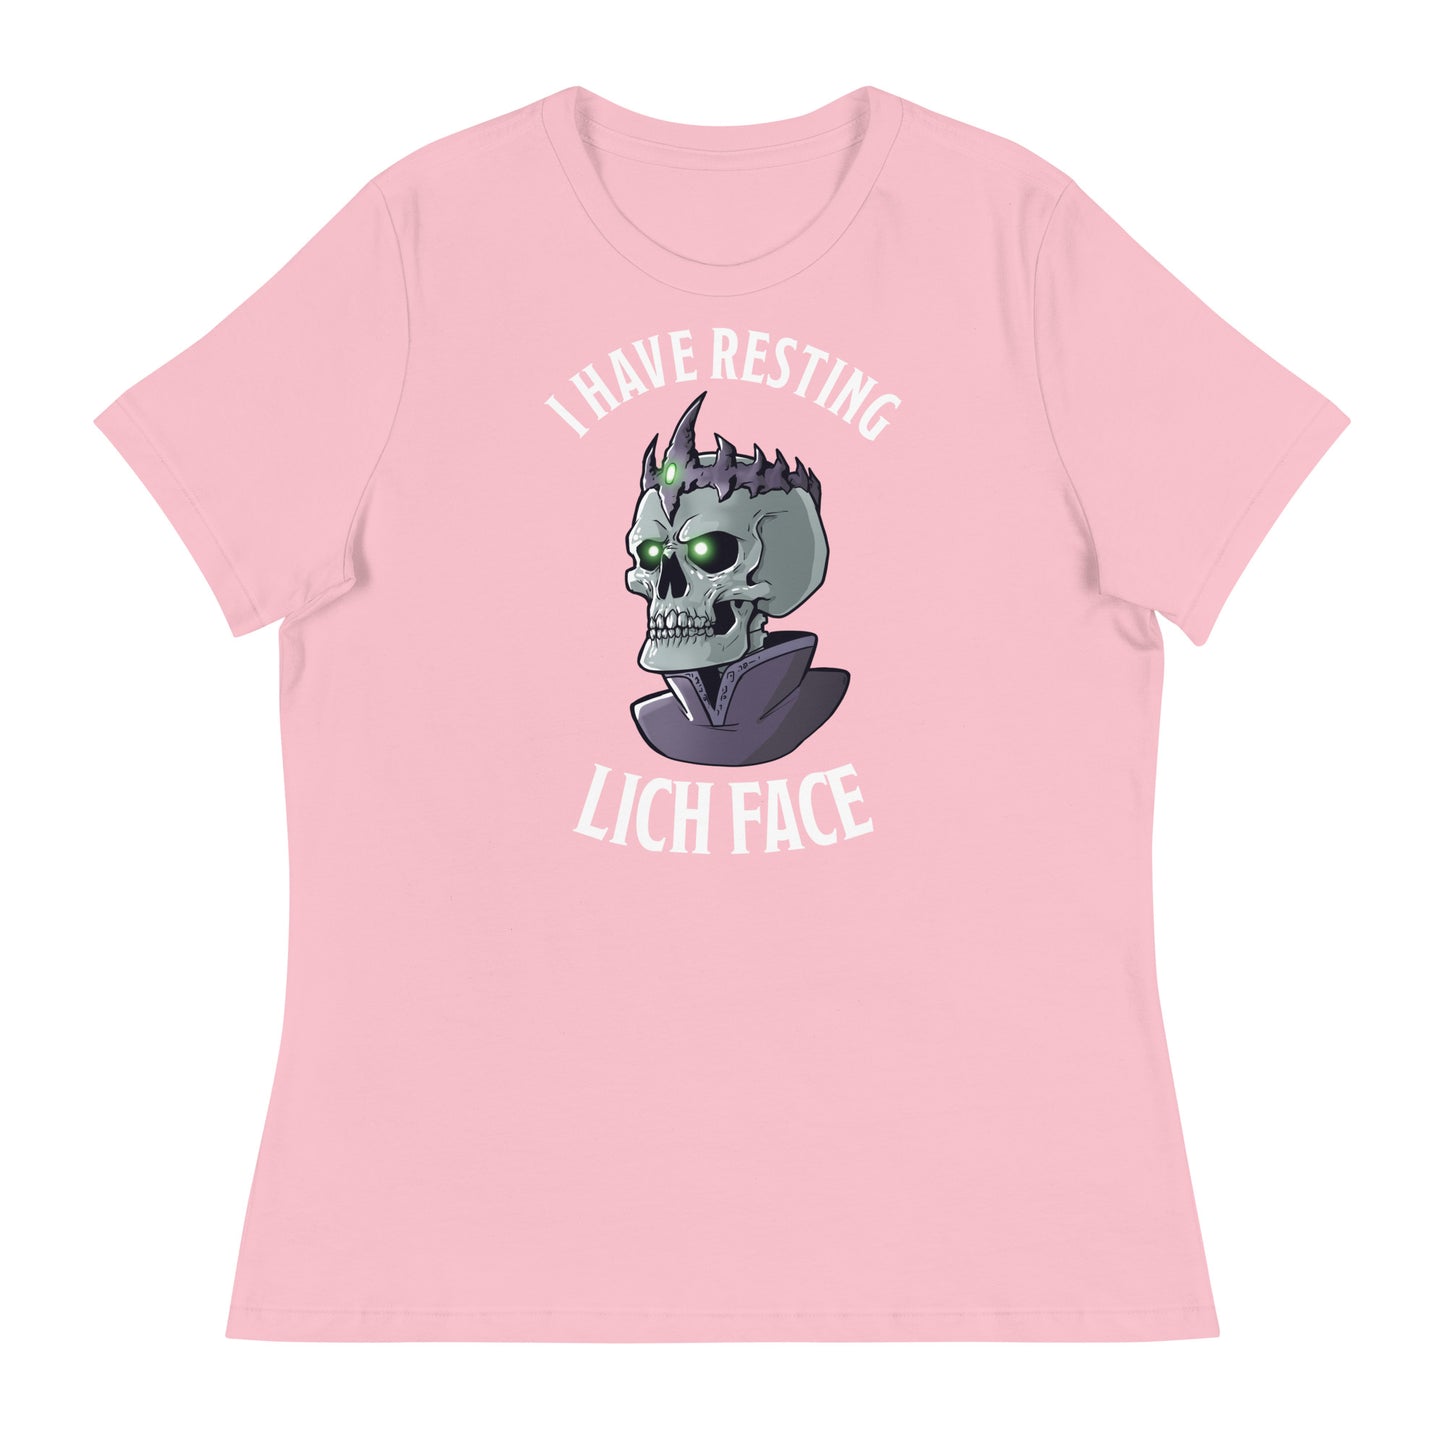 Resting Lich Face Women's Relaxed T-Shirt  Level 1 Gamers Pink S 